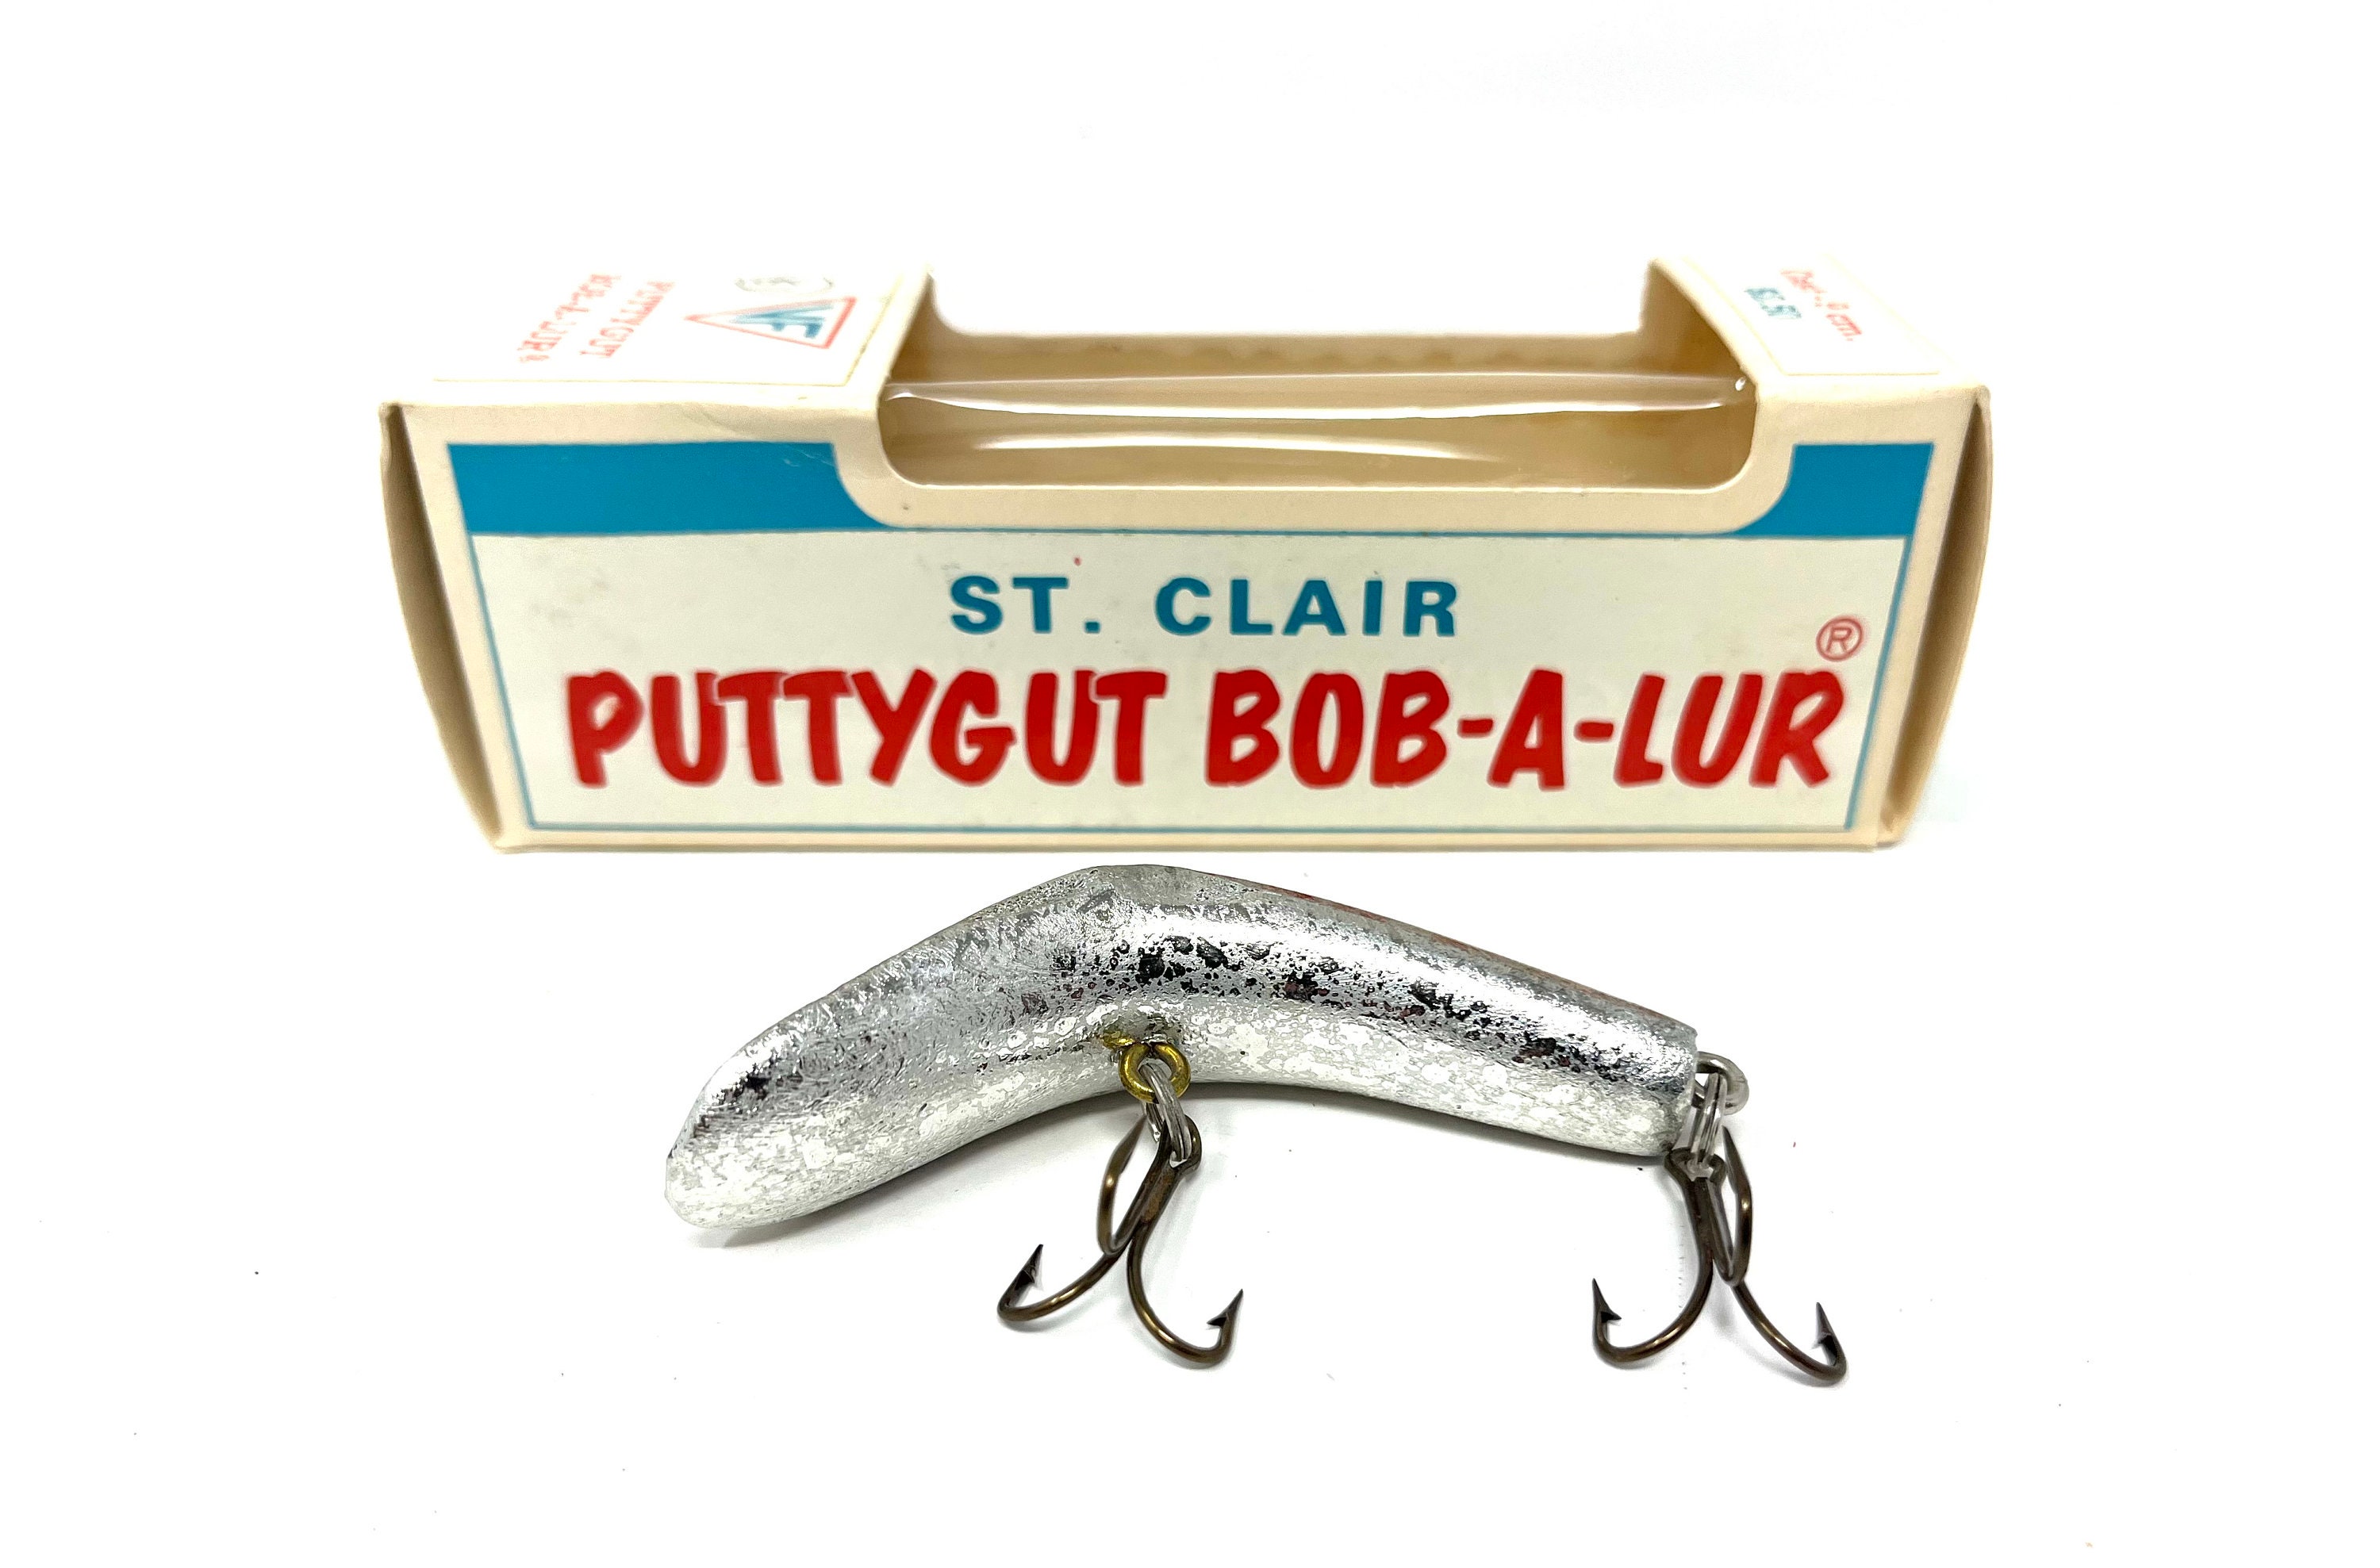 Vintage St Clair Puttygut Bob-a-lure Fishing Lure With Original